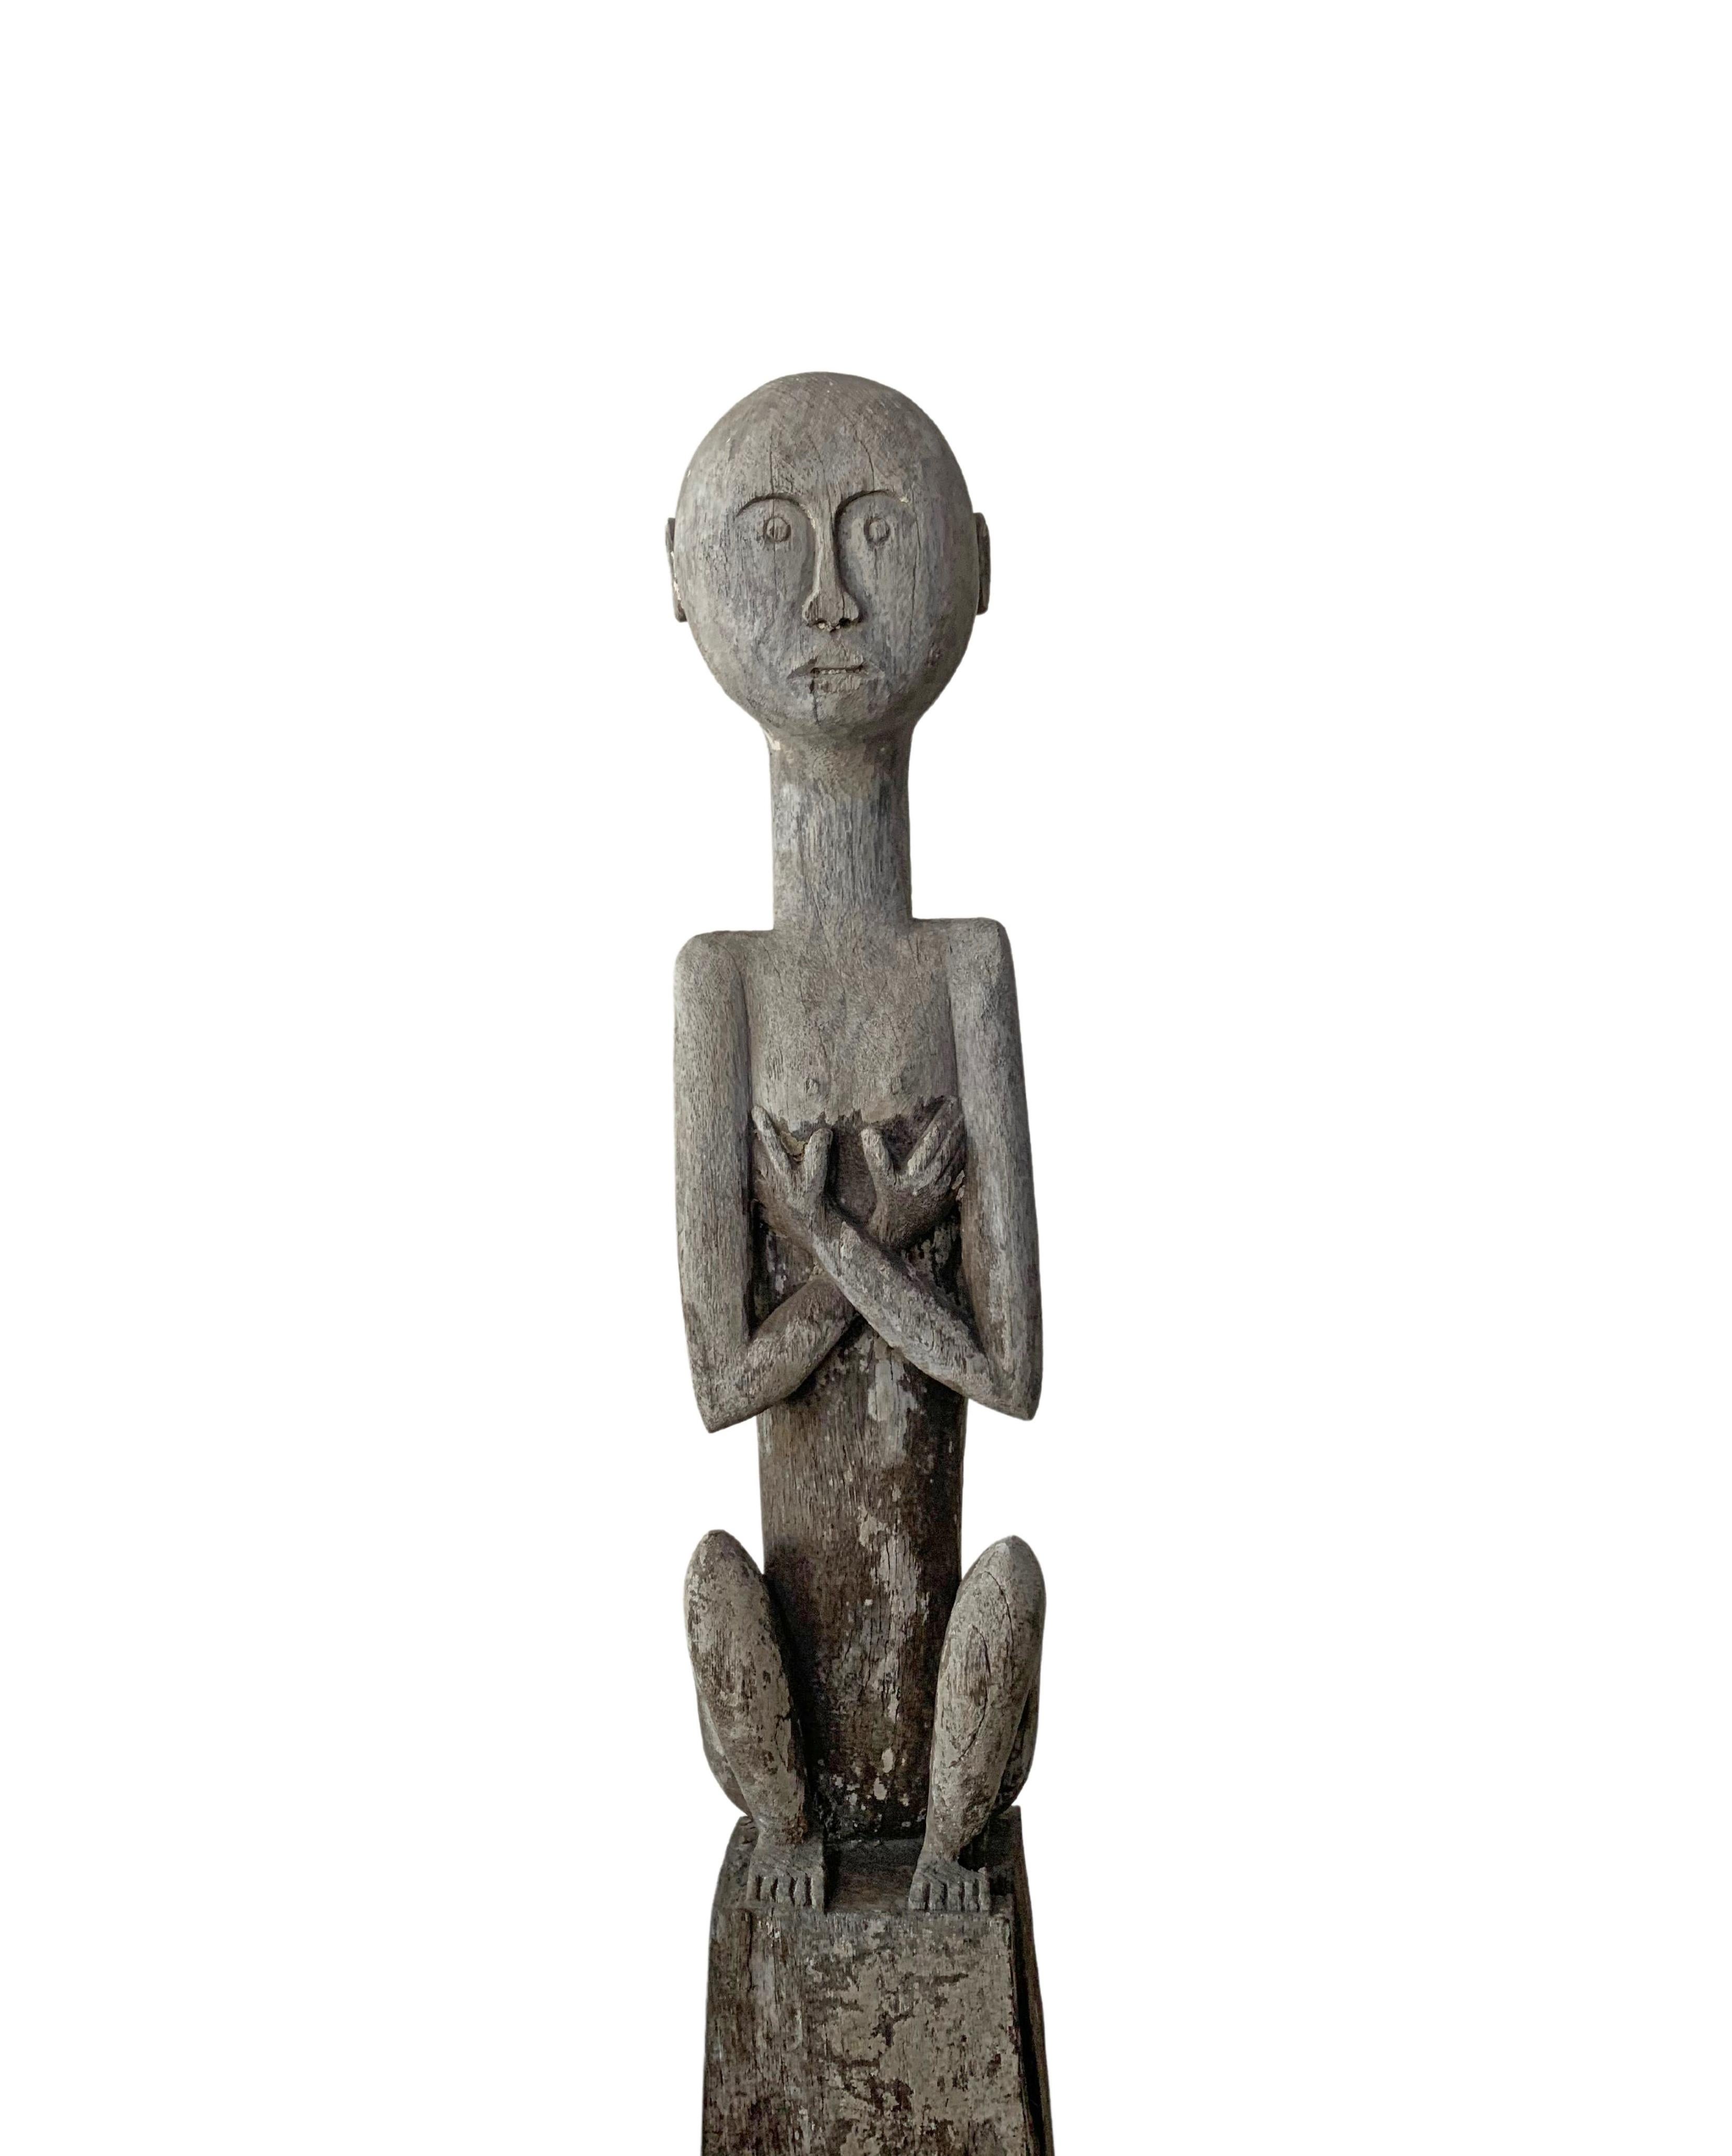 This wooden sculpture of an ancestral figure originates from the Island of Sumba in Indonesia. It features a wonderful age-related patina and wood texture. Carved from a single block of wood the sculpture is mounted on a black iron Stand. The